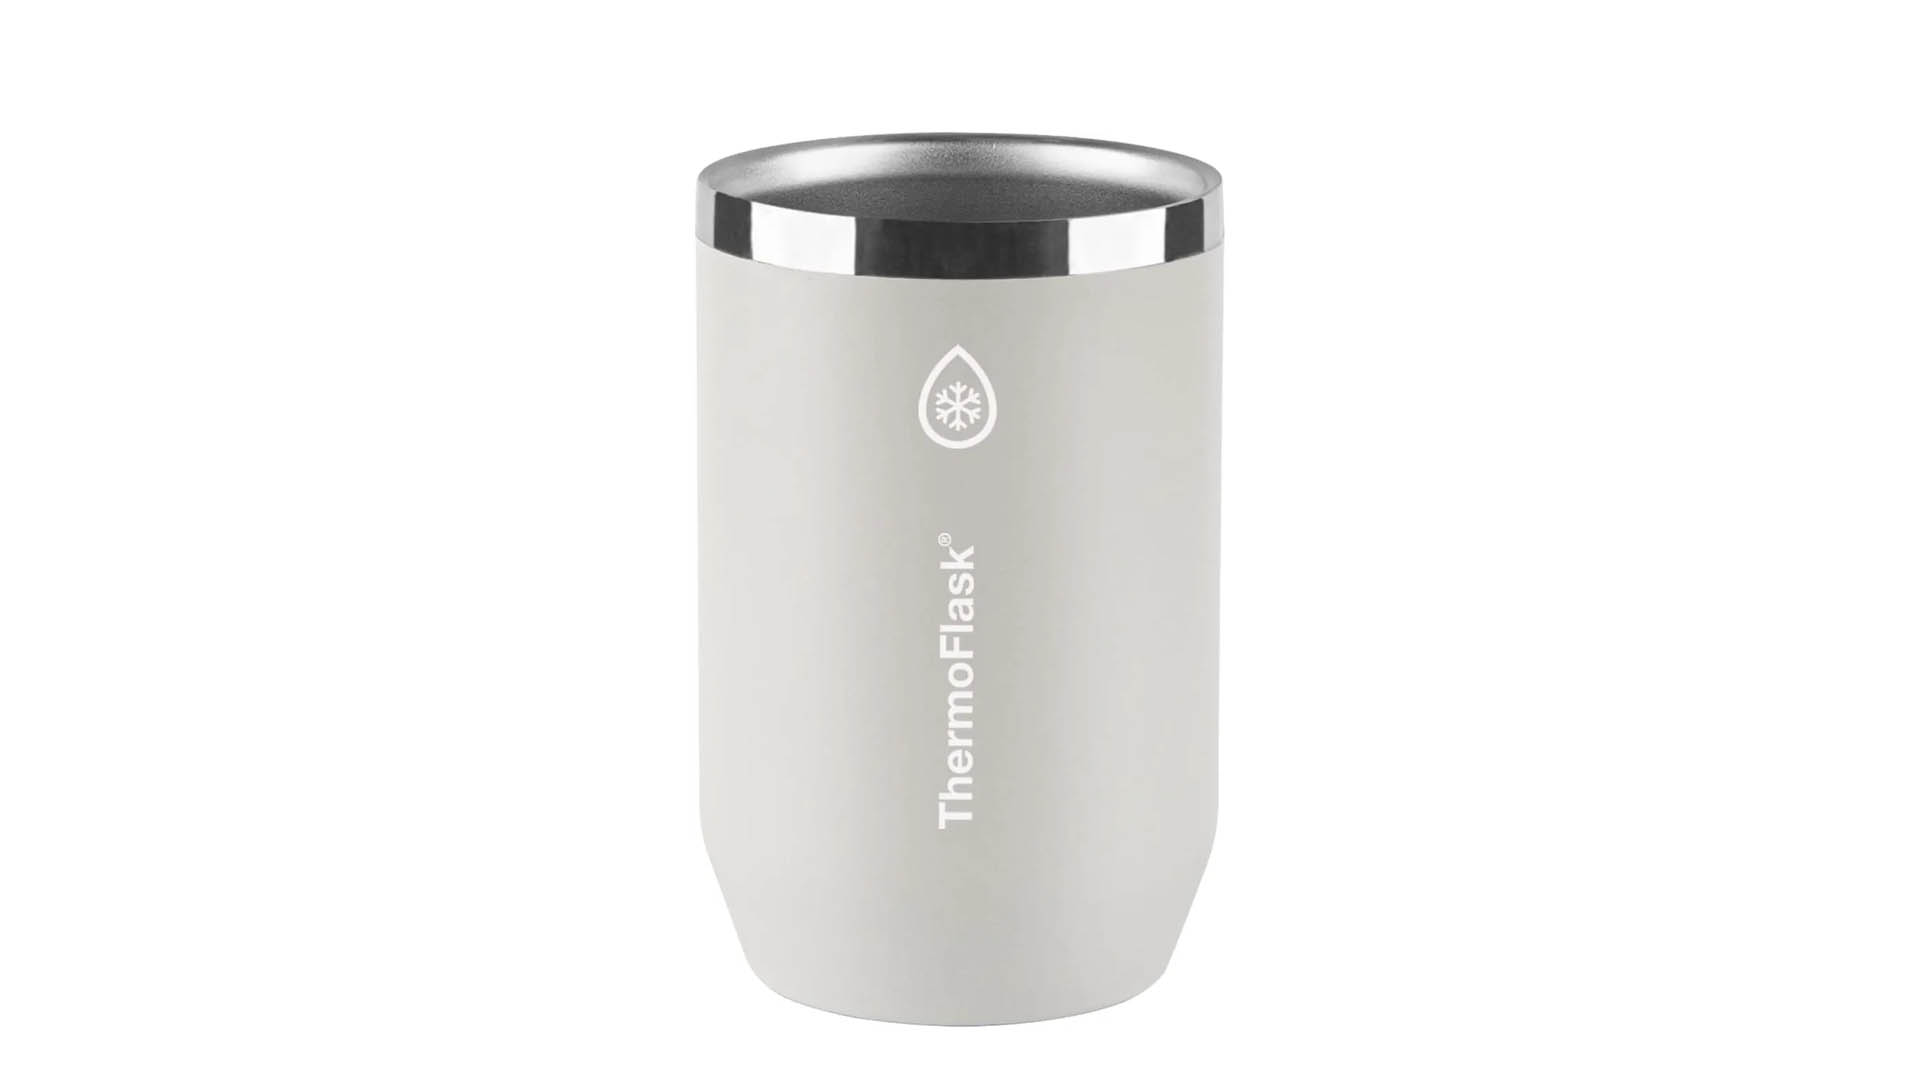 https://onecms-res.cloudinary.com/image/upload/v1700020597/mediacorp/8days/image/2023/11/15/thermoflask_can_cooler.jpg